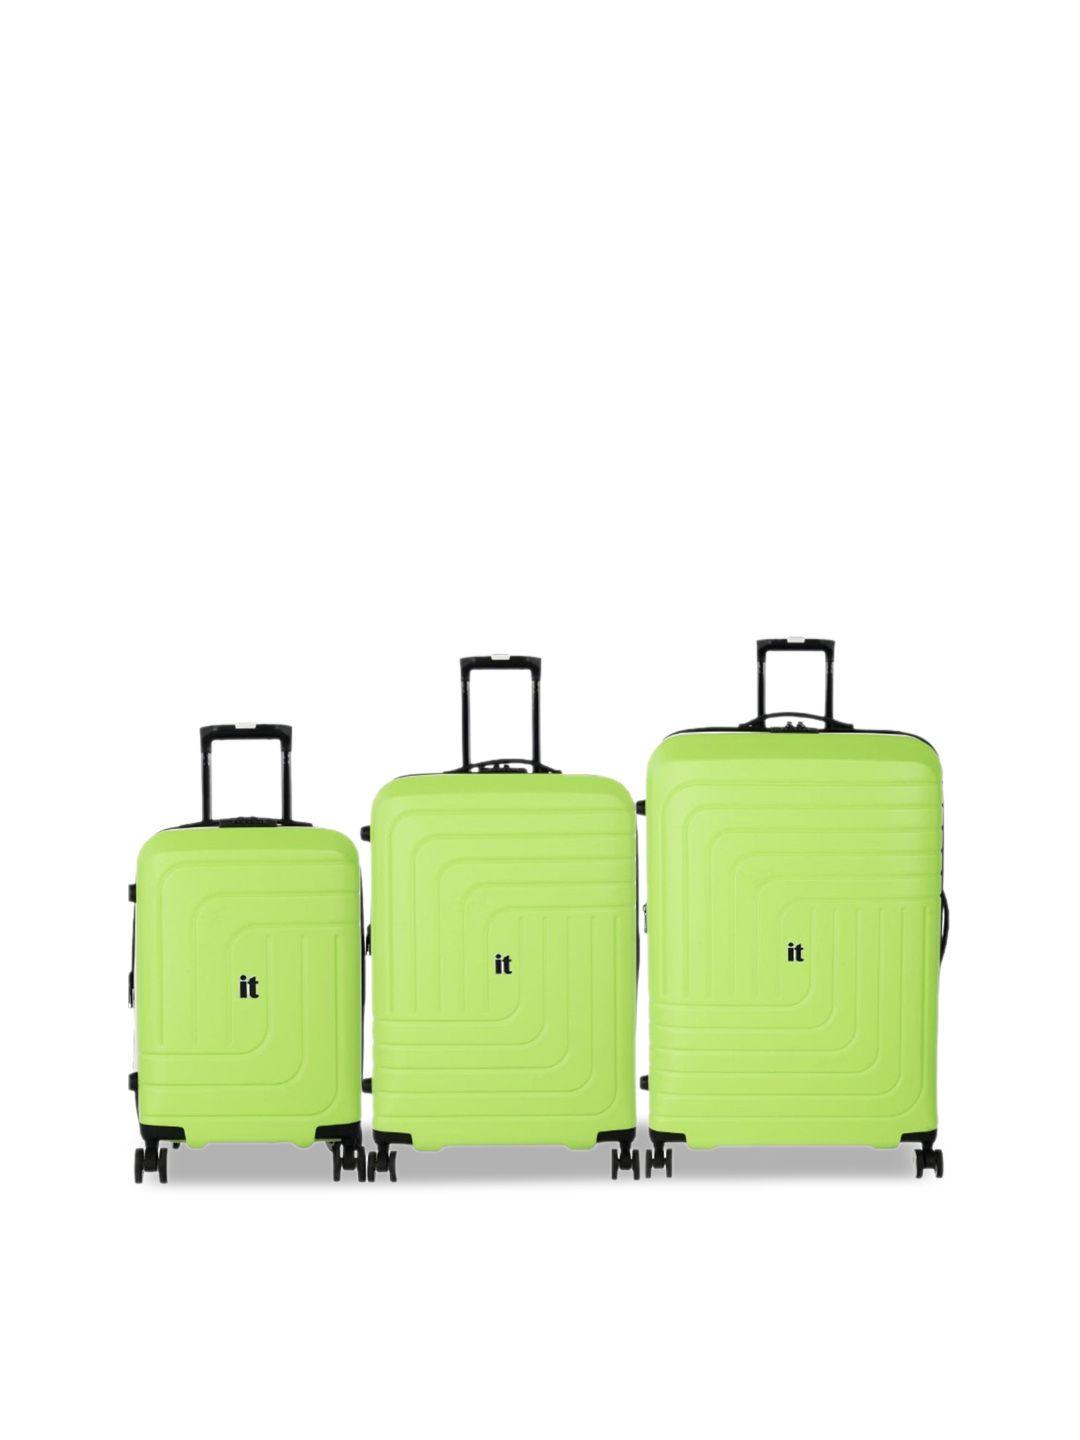 it luggage set of 3 convolved textured 28 inches hard-sided trolley bag